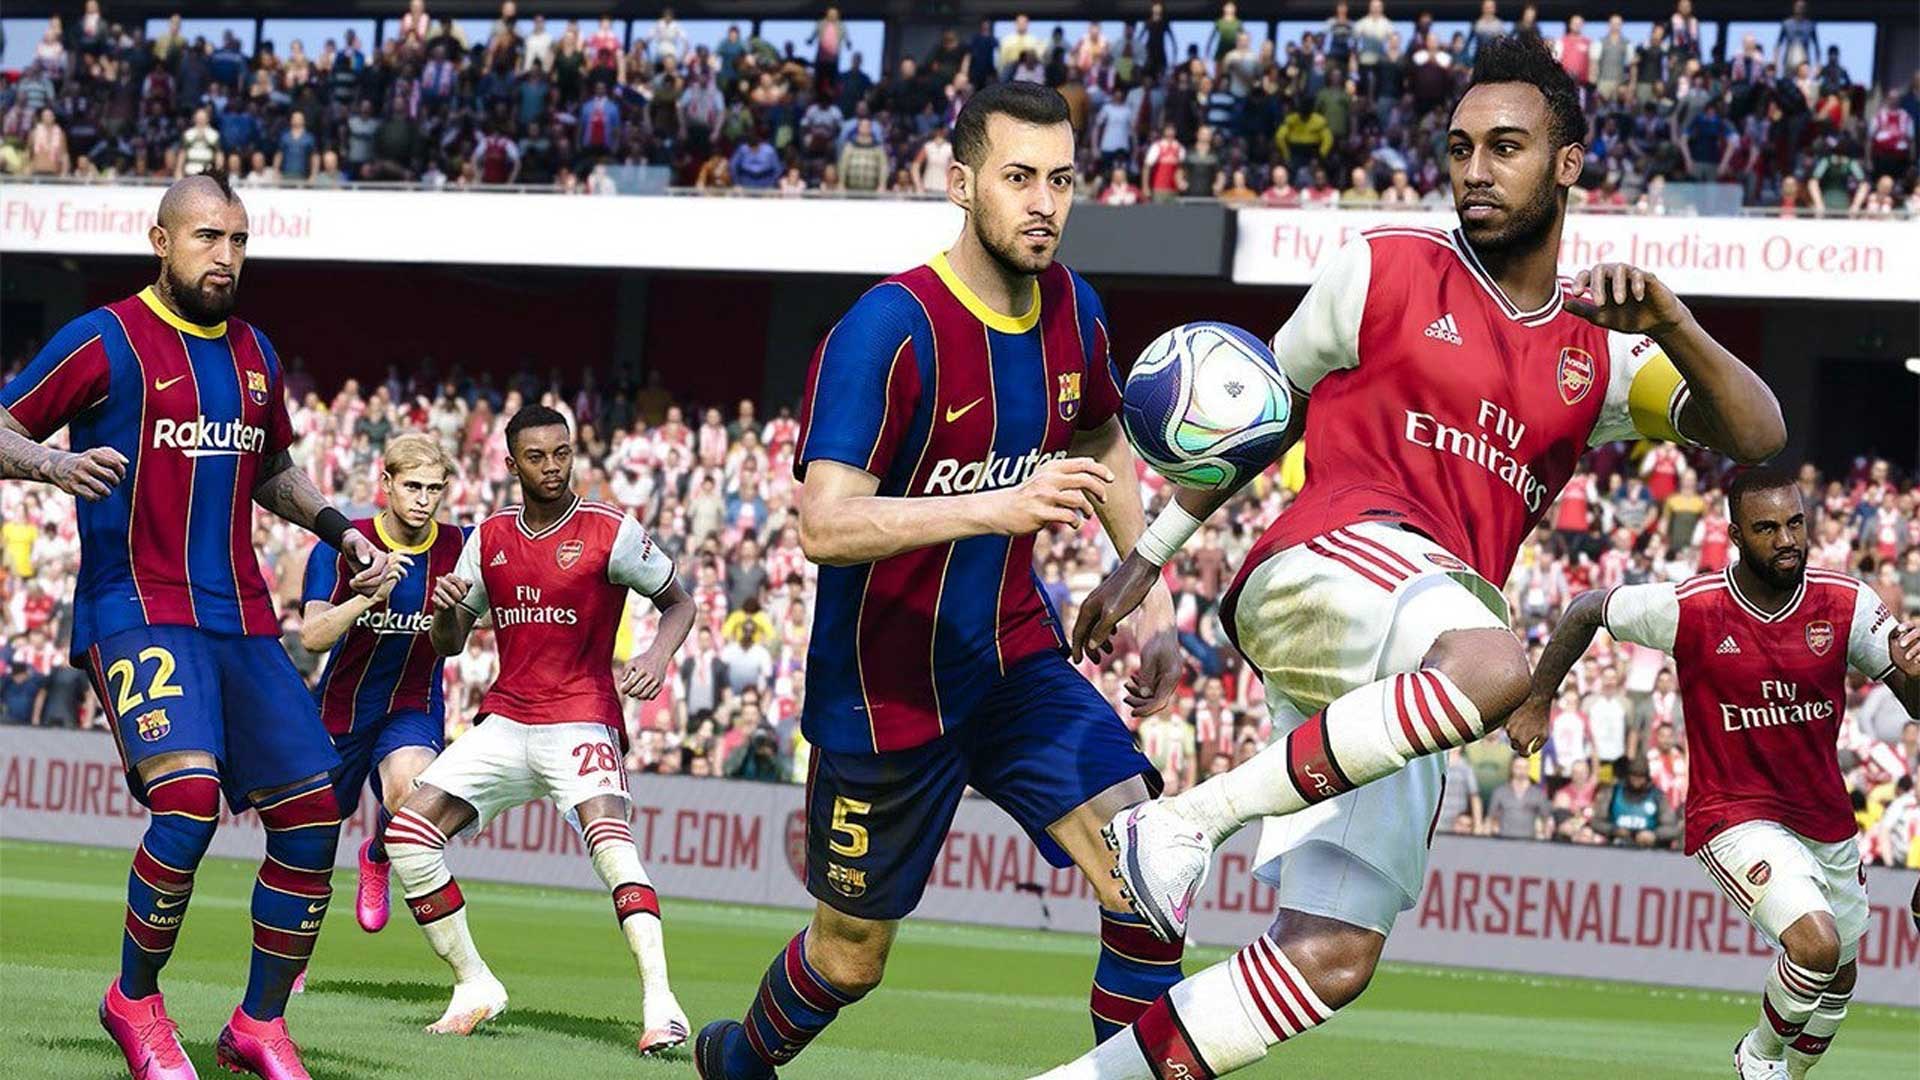 eFootball PES 2021 Review